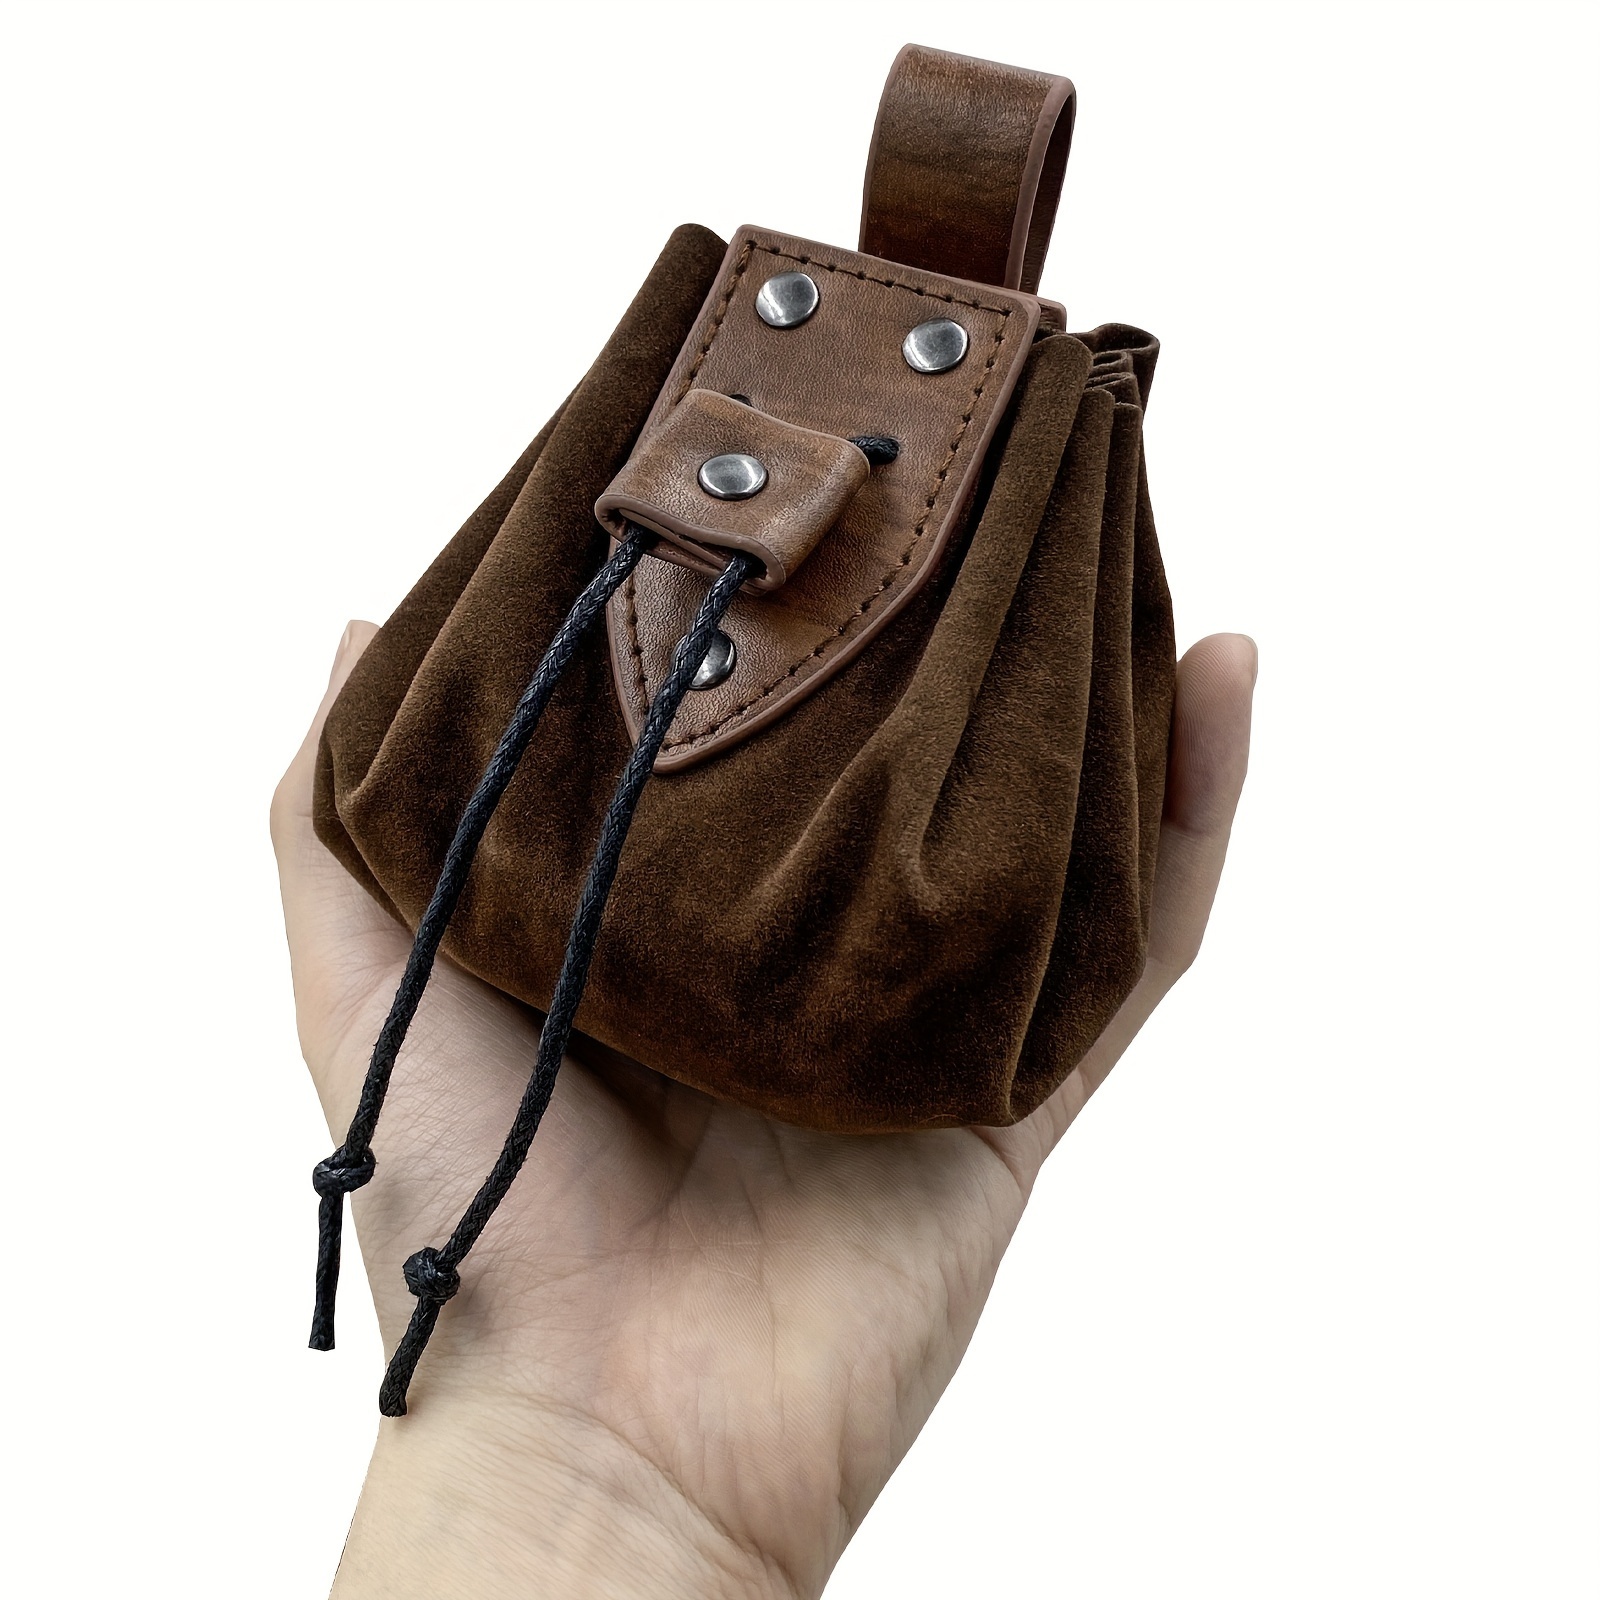 Small leather pouch, coin pouch with drawstring, Medieval style